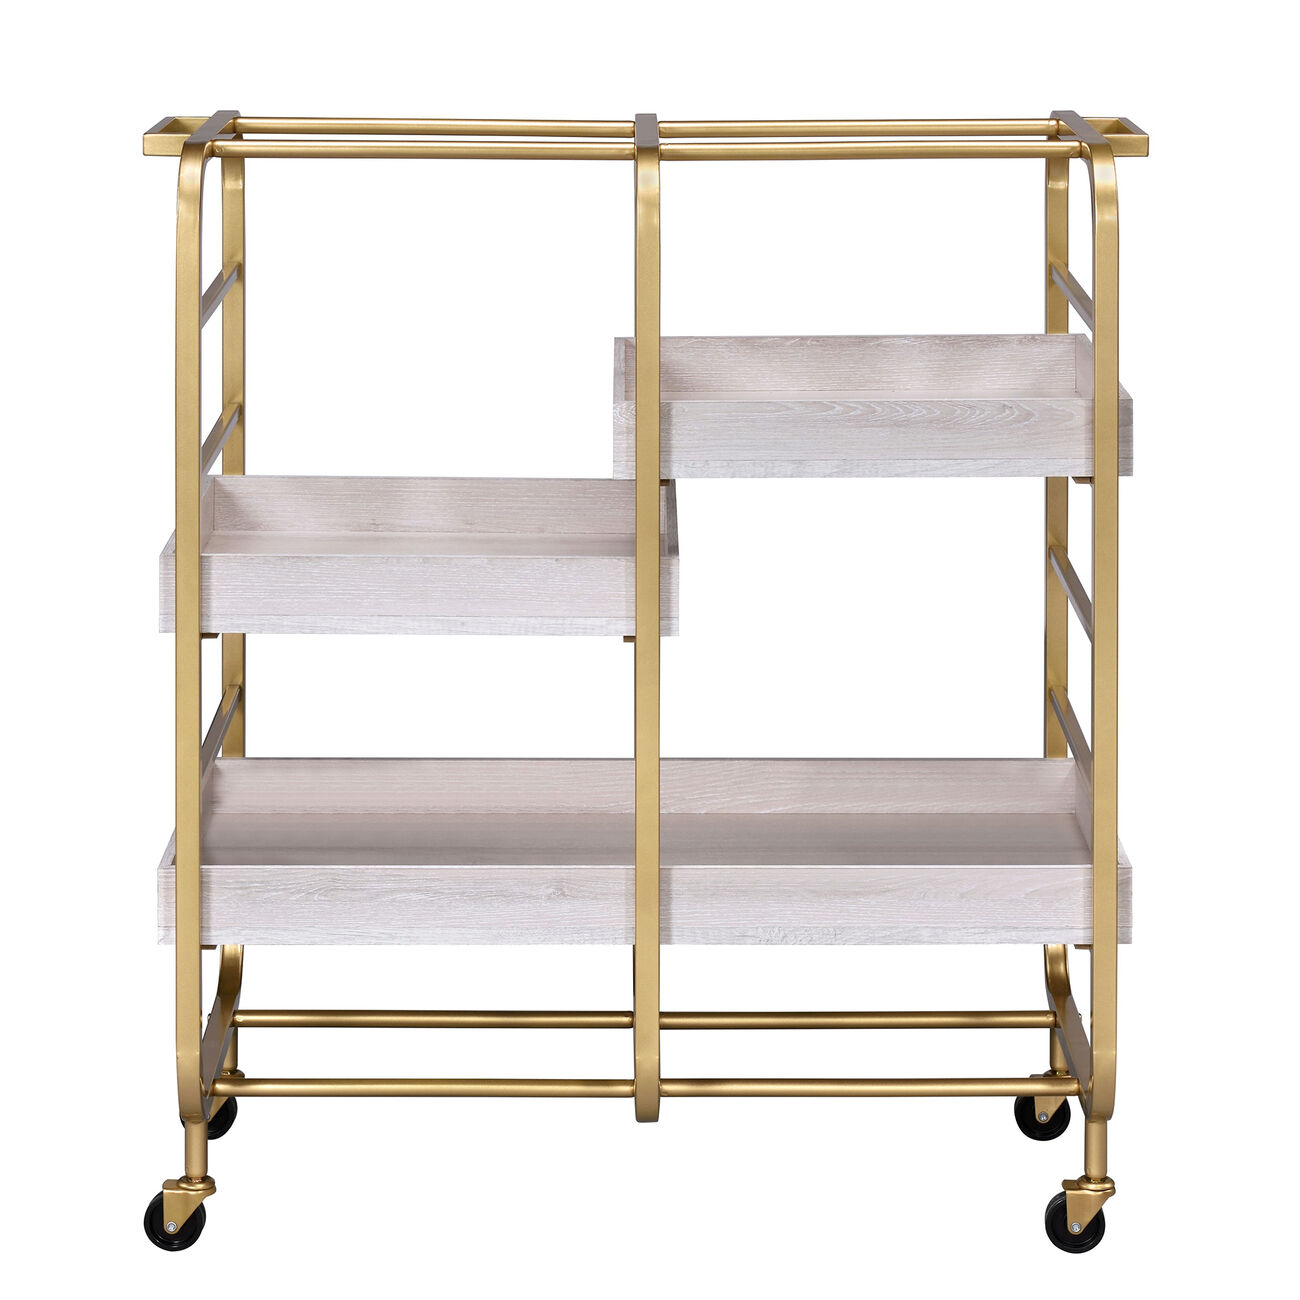 Metal Frame Serving Cart with Adjustable Compartments,Gold and Washed White